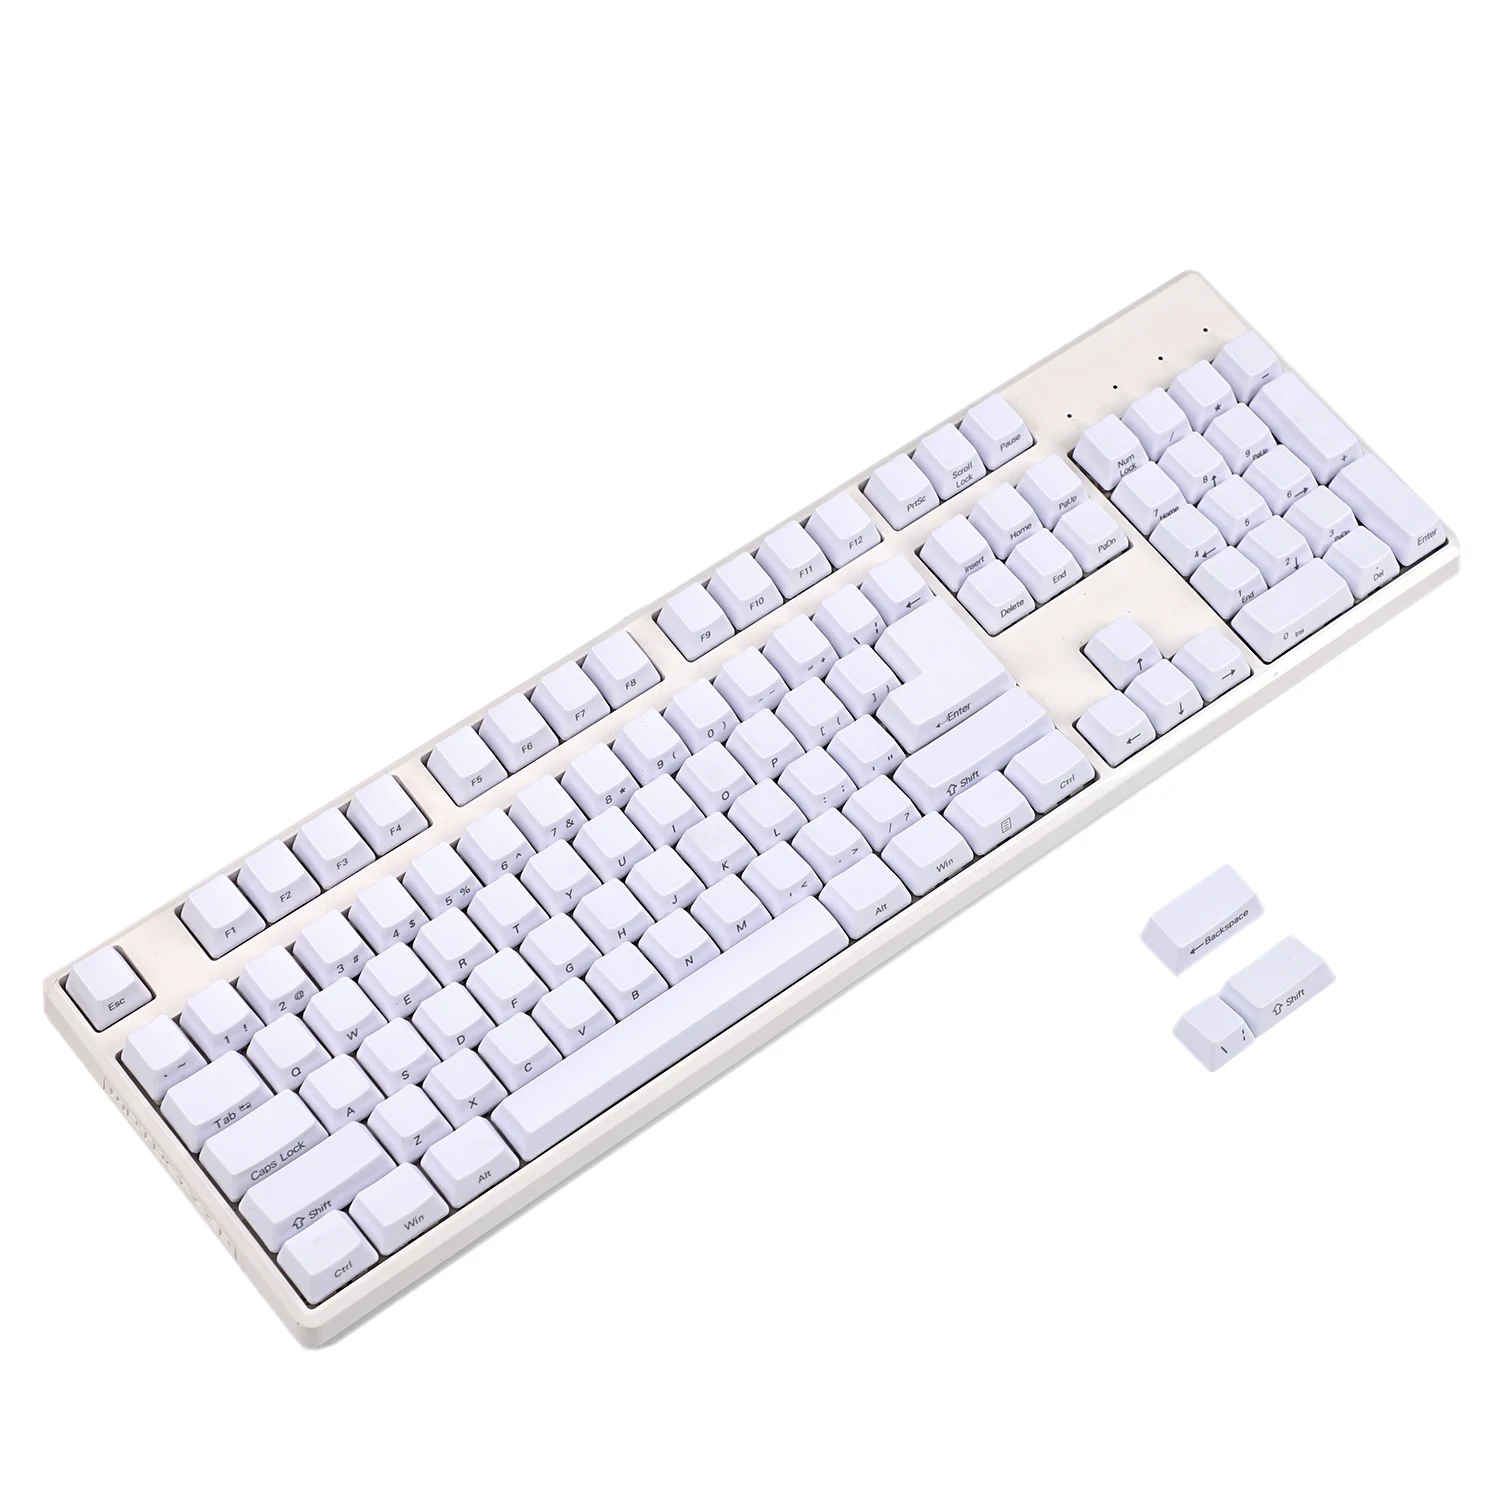 YMDK Thick PBT Dolch OEM Profile Russian Keycap Keyset Suitable For Steelseries 6GV2 7G 2 - Pudding Keycap